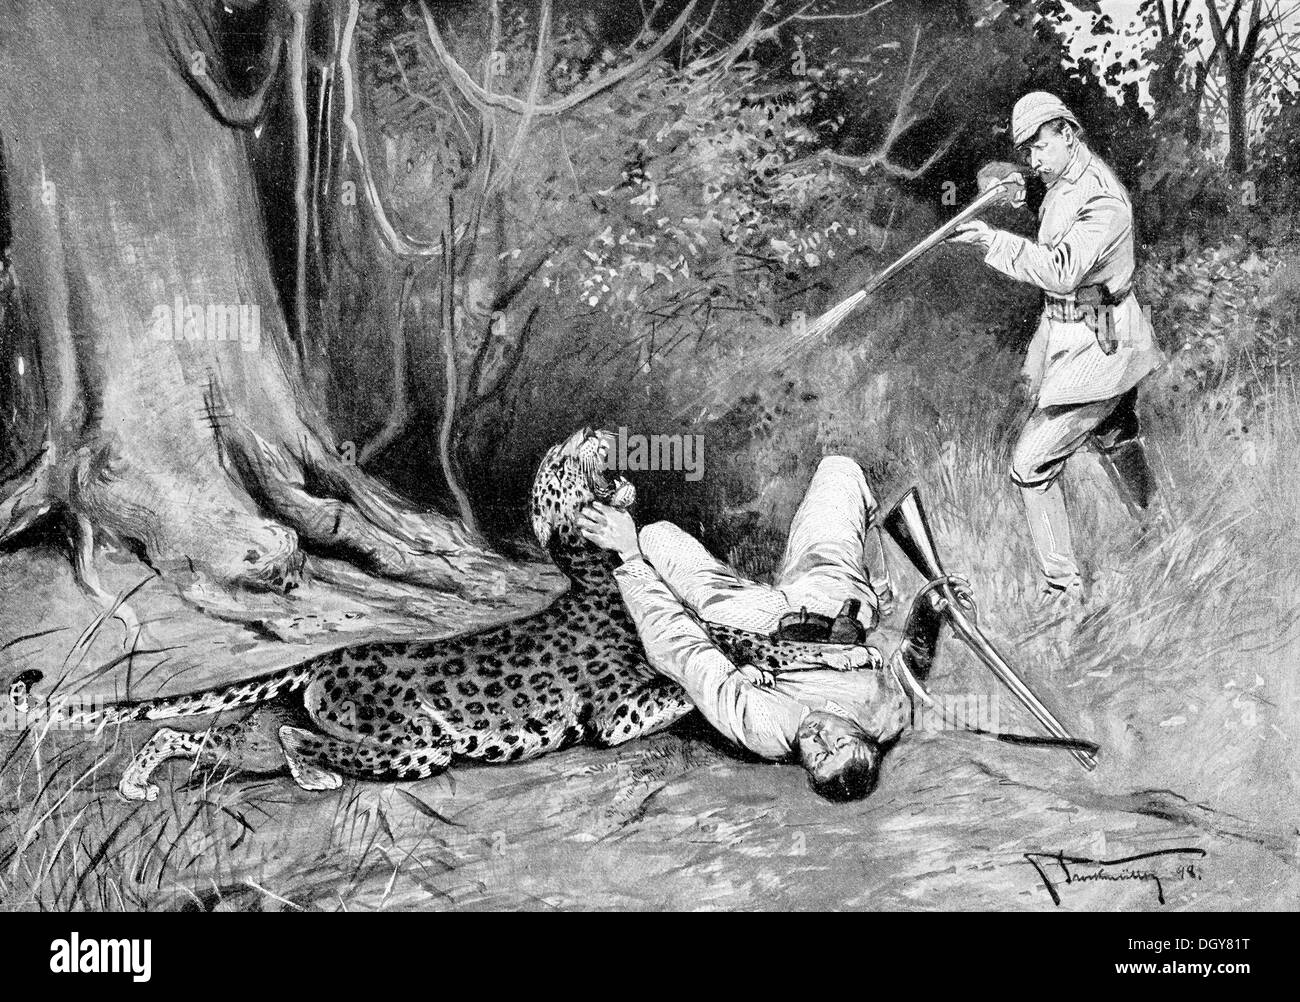 Leopard hunting in German South-West Africa, illustration from the Yearbook of Modern Art in Master Woodcuts, 1900, Namibia Stock Photo